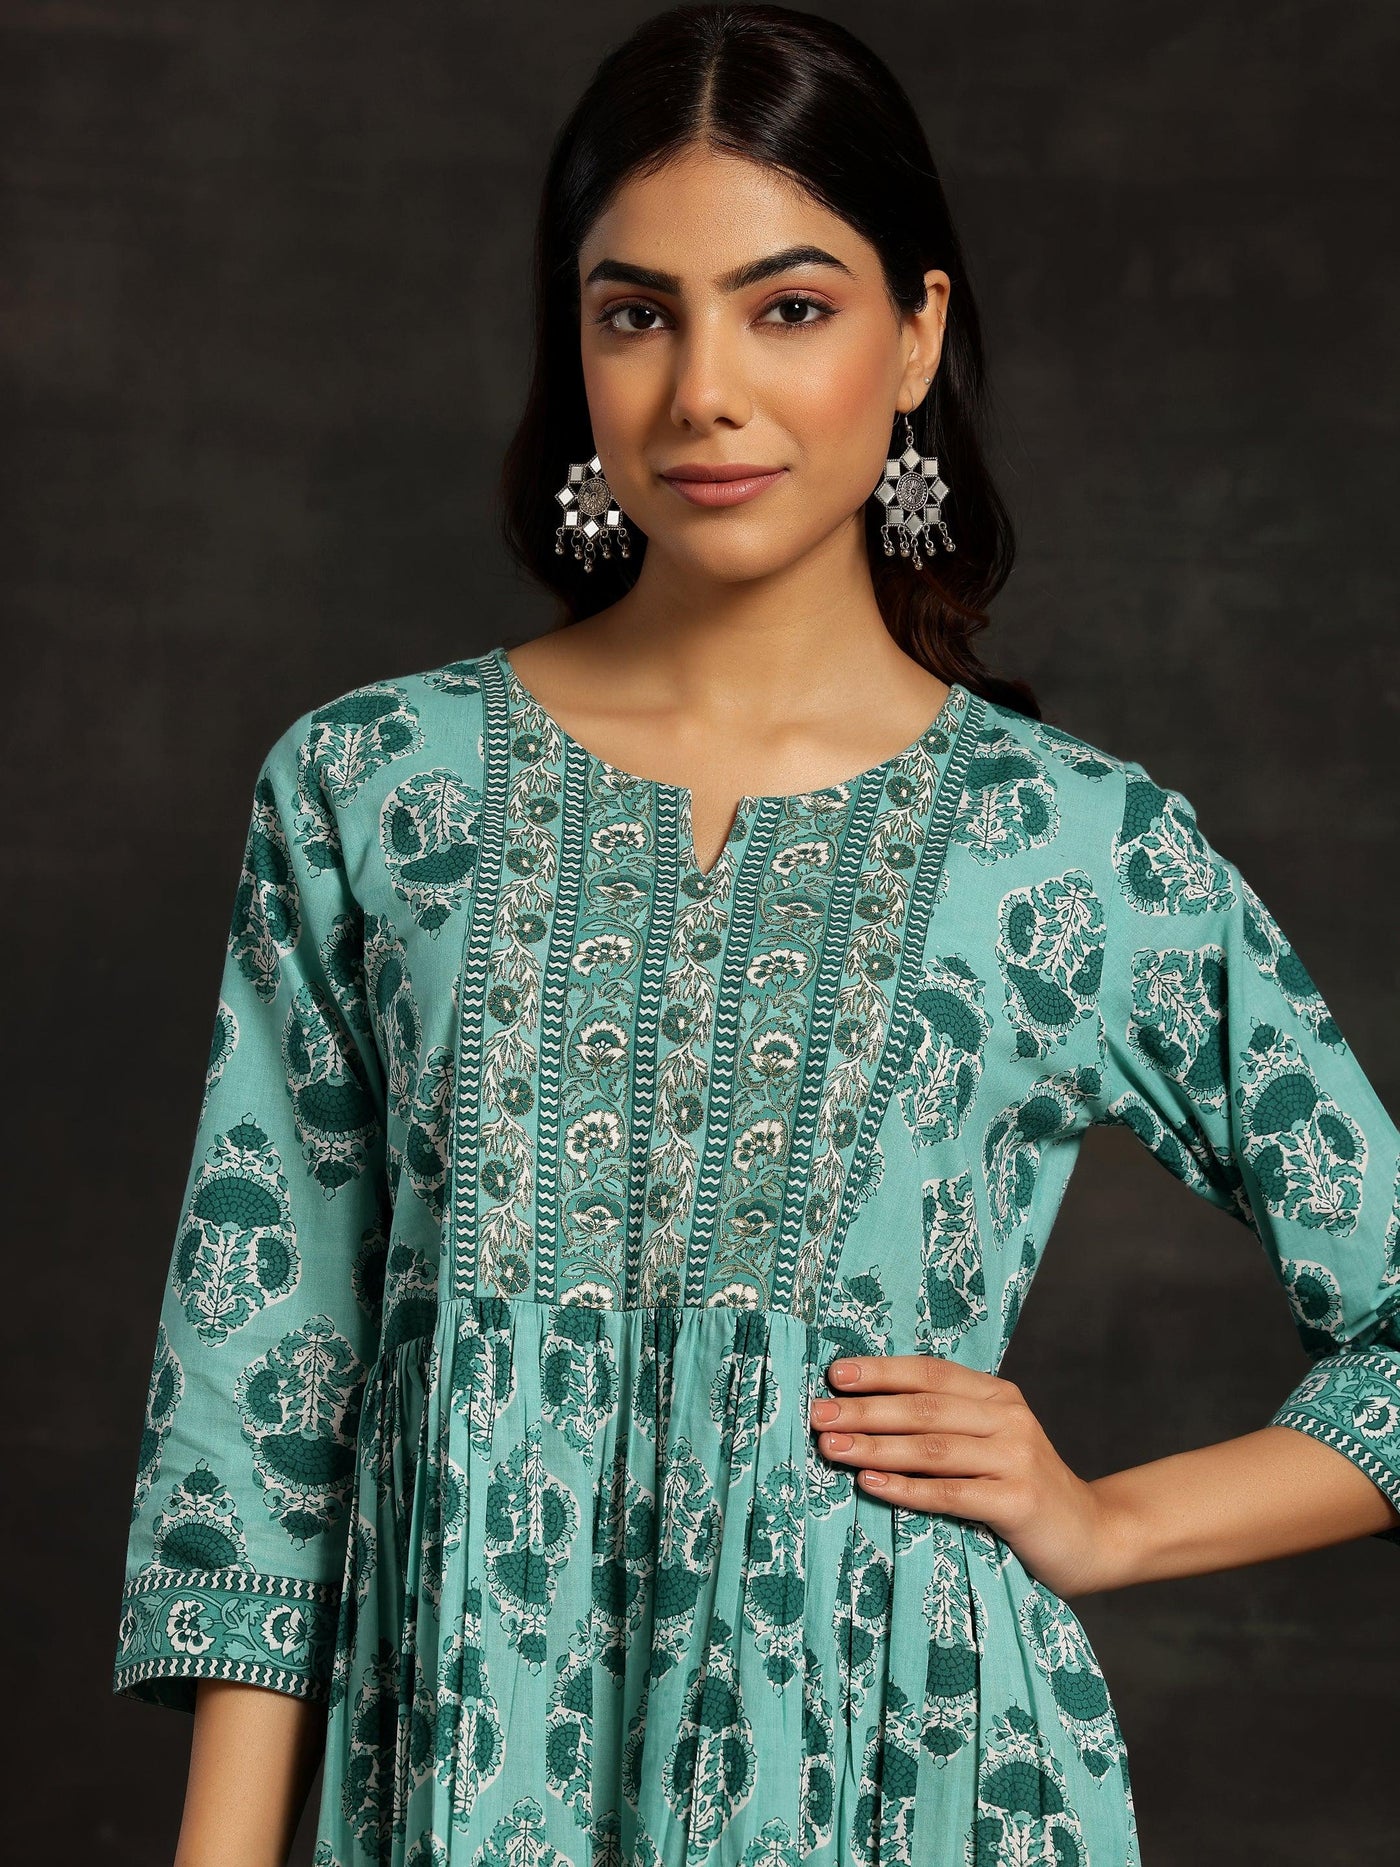 Sea Green Printed Cotton Fit and Flare Dress - Libas